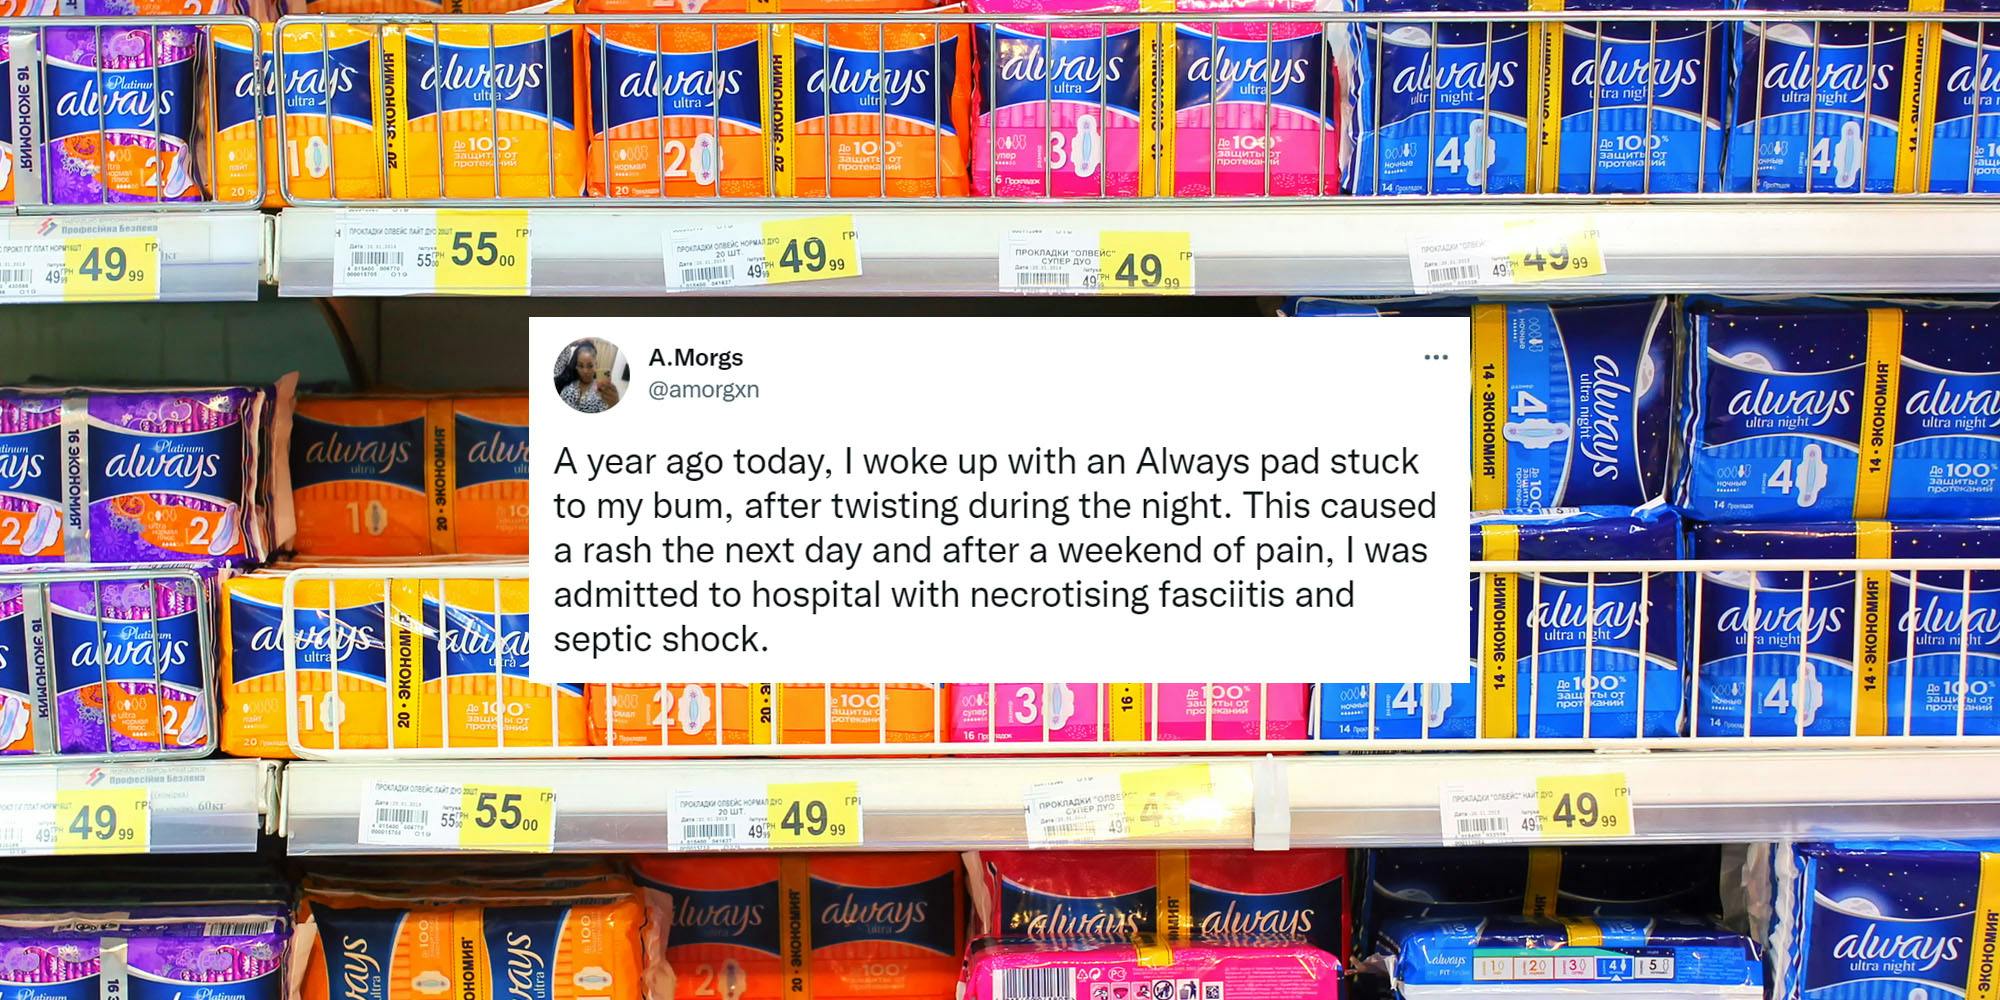 Always pads in aisle with tweet centered by A.Morgs "A year ago today, I woke up with an Always pad stuck to my bum, after twisting during the night. This caused a rash the next day and after a weekend of pain, I was admitted to hospital with necrotising fasciitis and septic shock."